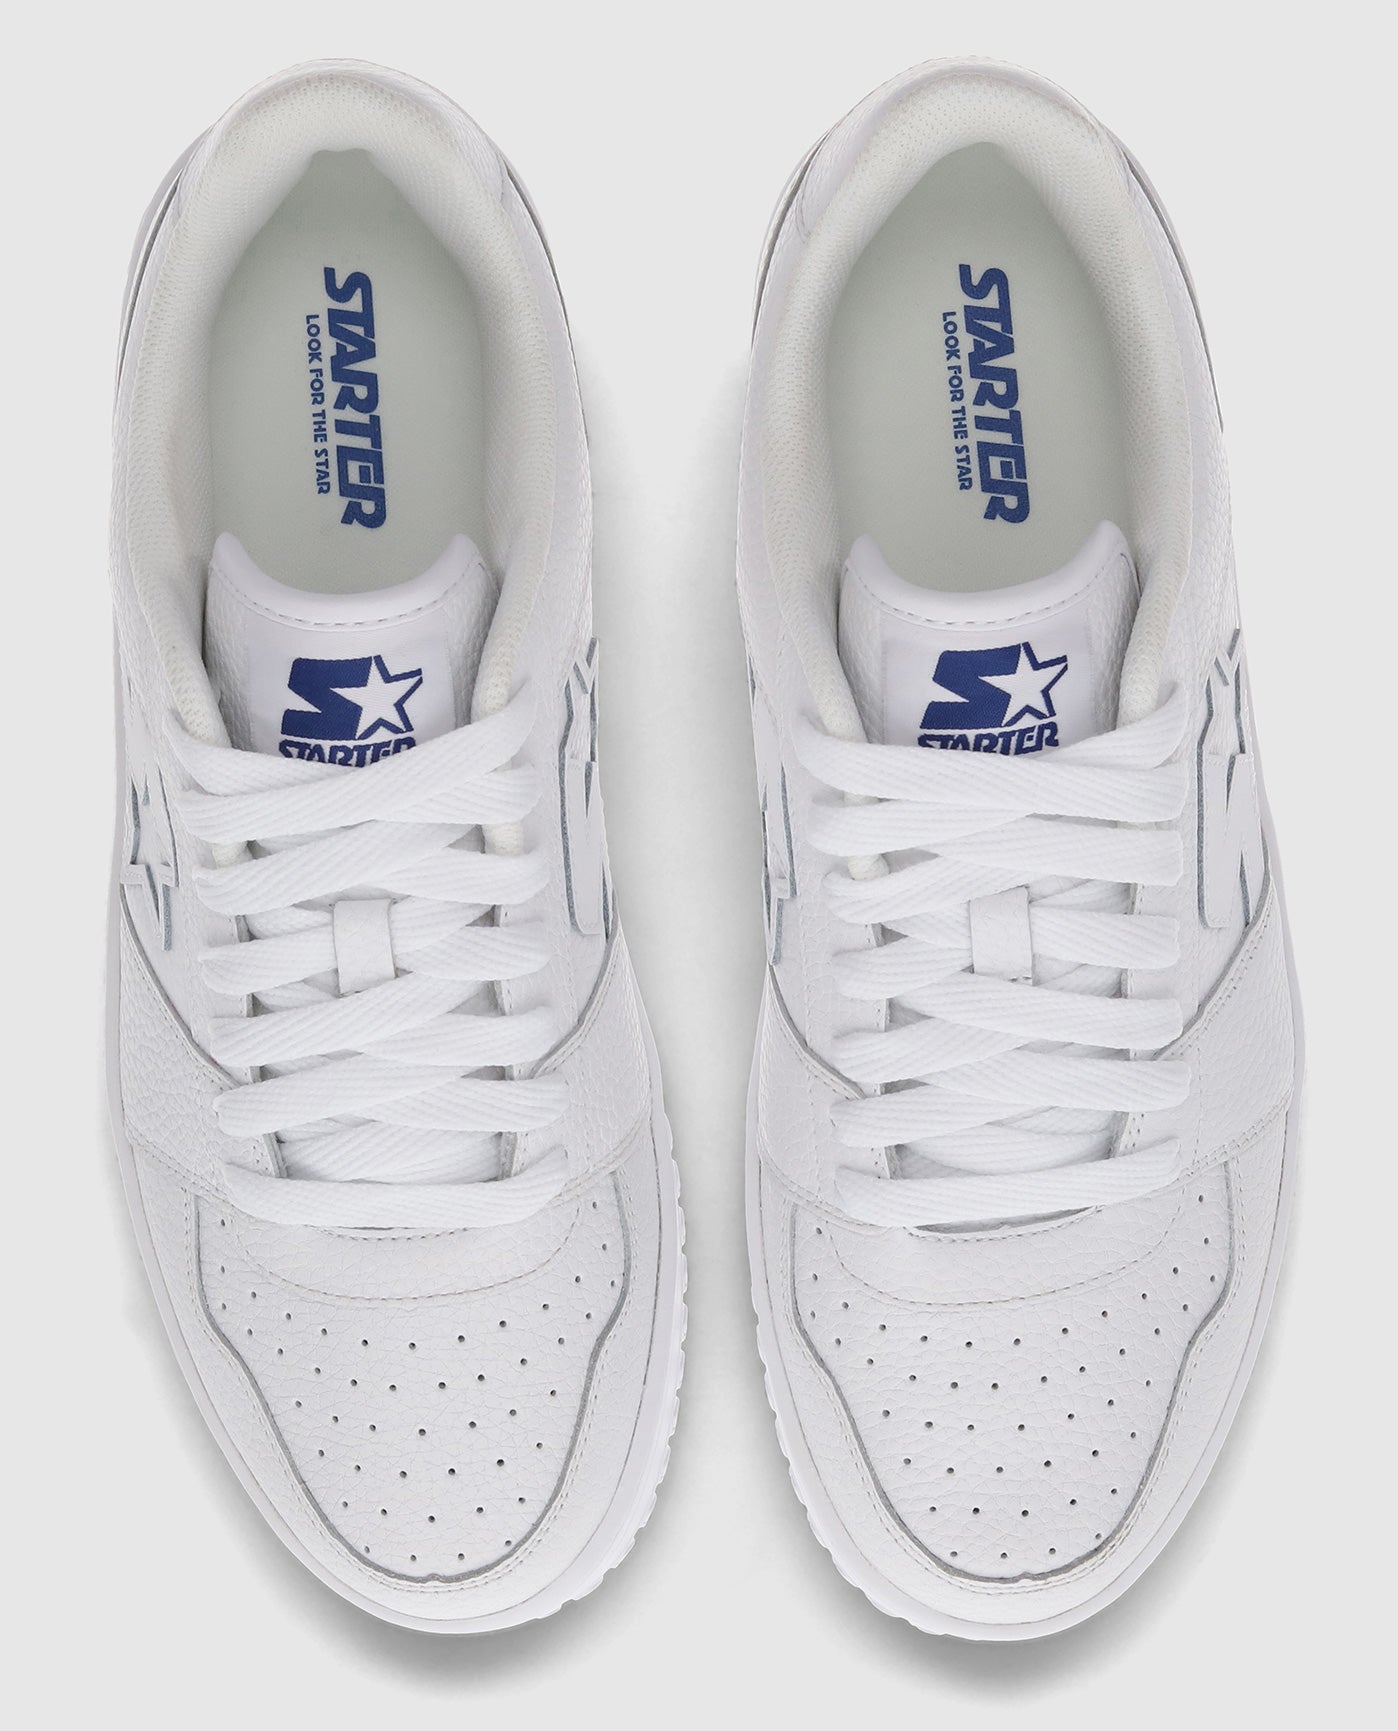 Top angle of White Starter LFS 1 Sneakers | White